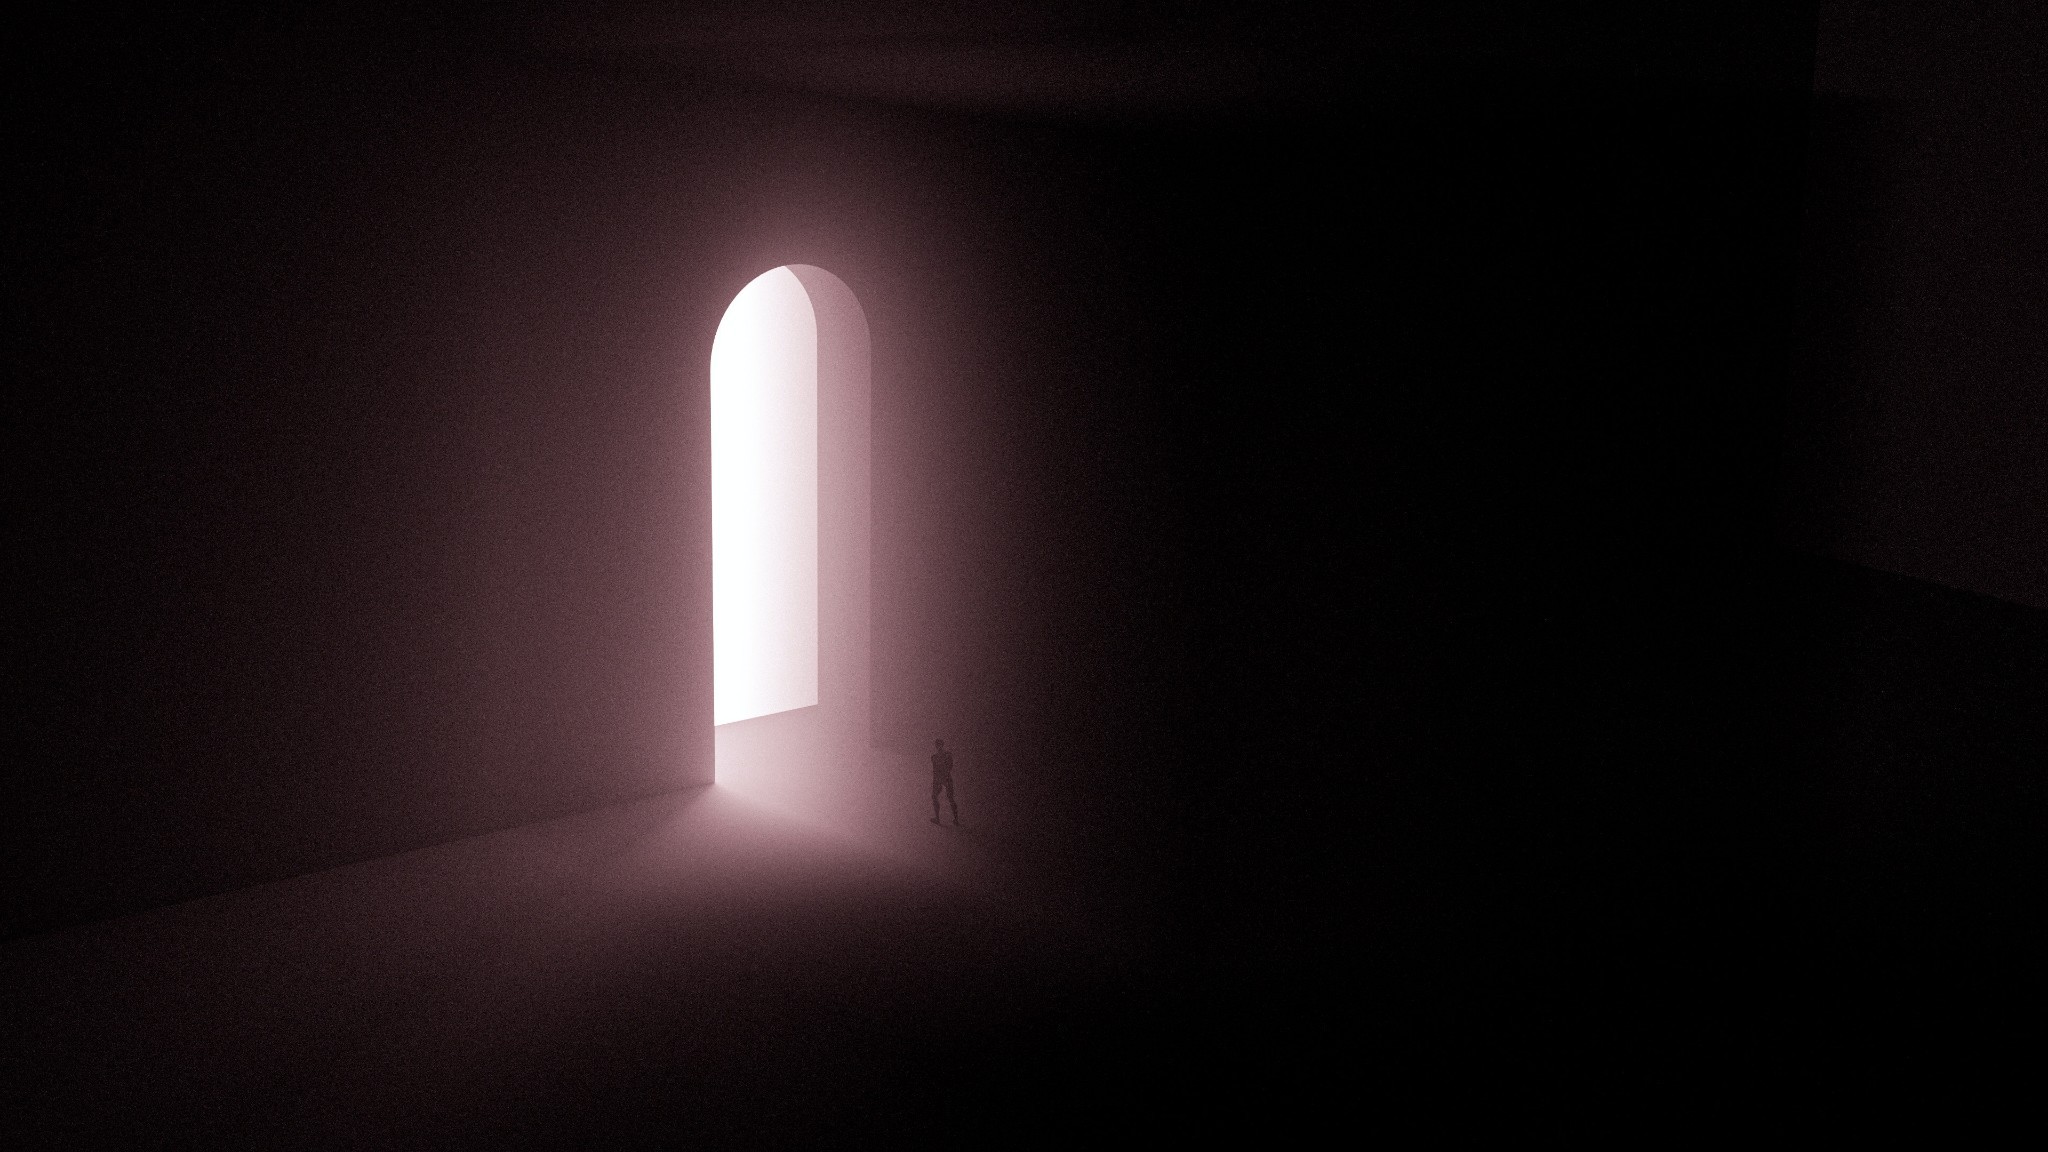 (Free stock image). A foggy white door amidst a black background